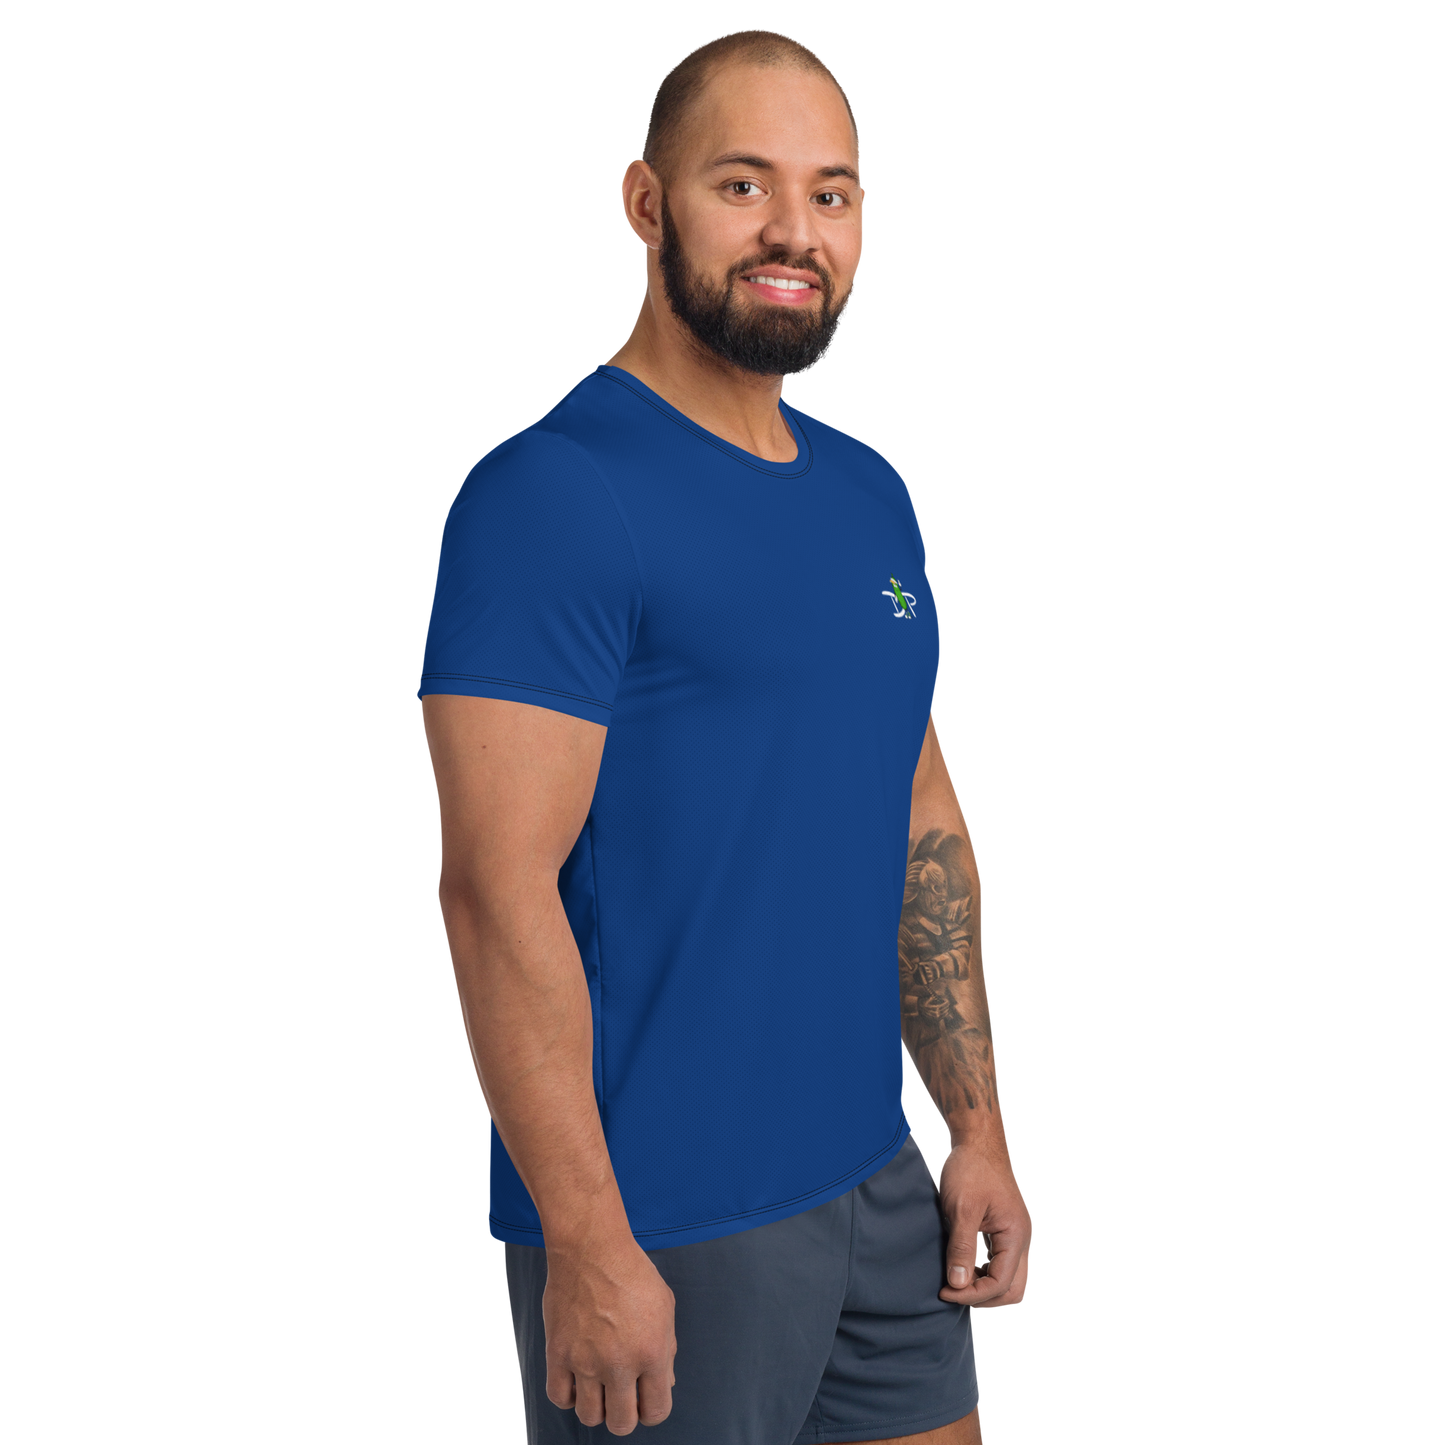 PICKLEBALL on Blue - Men's Athletic T-Shirt by Dizzy Pickle